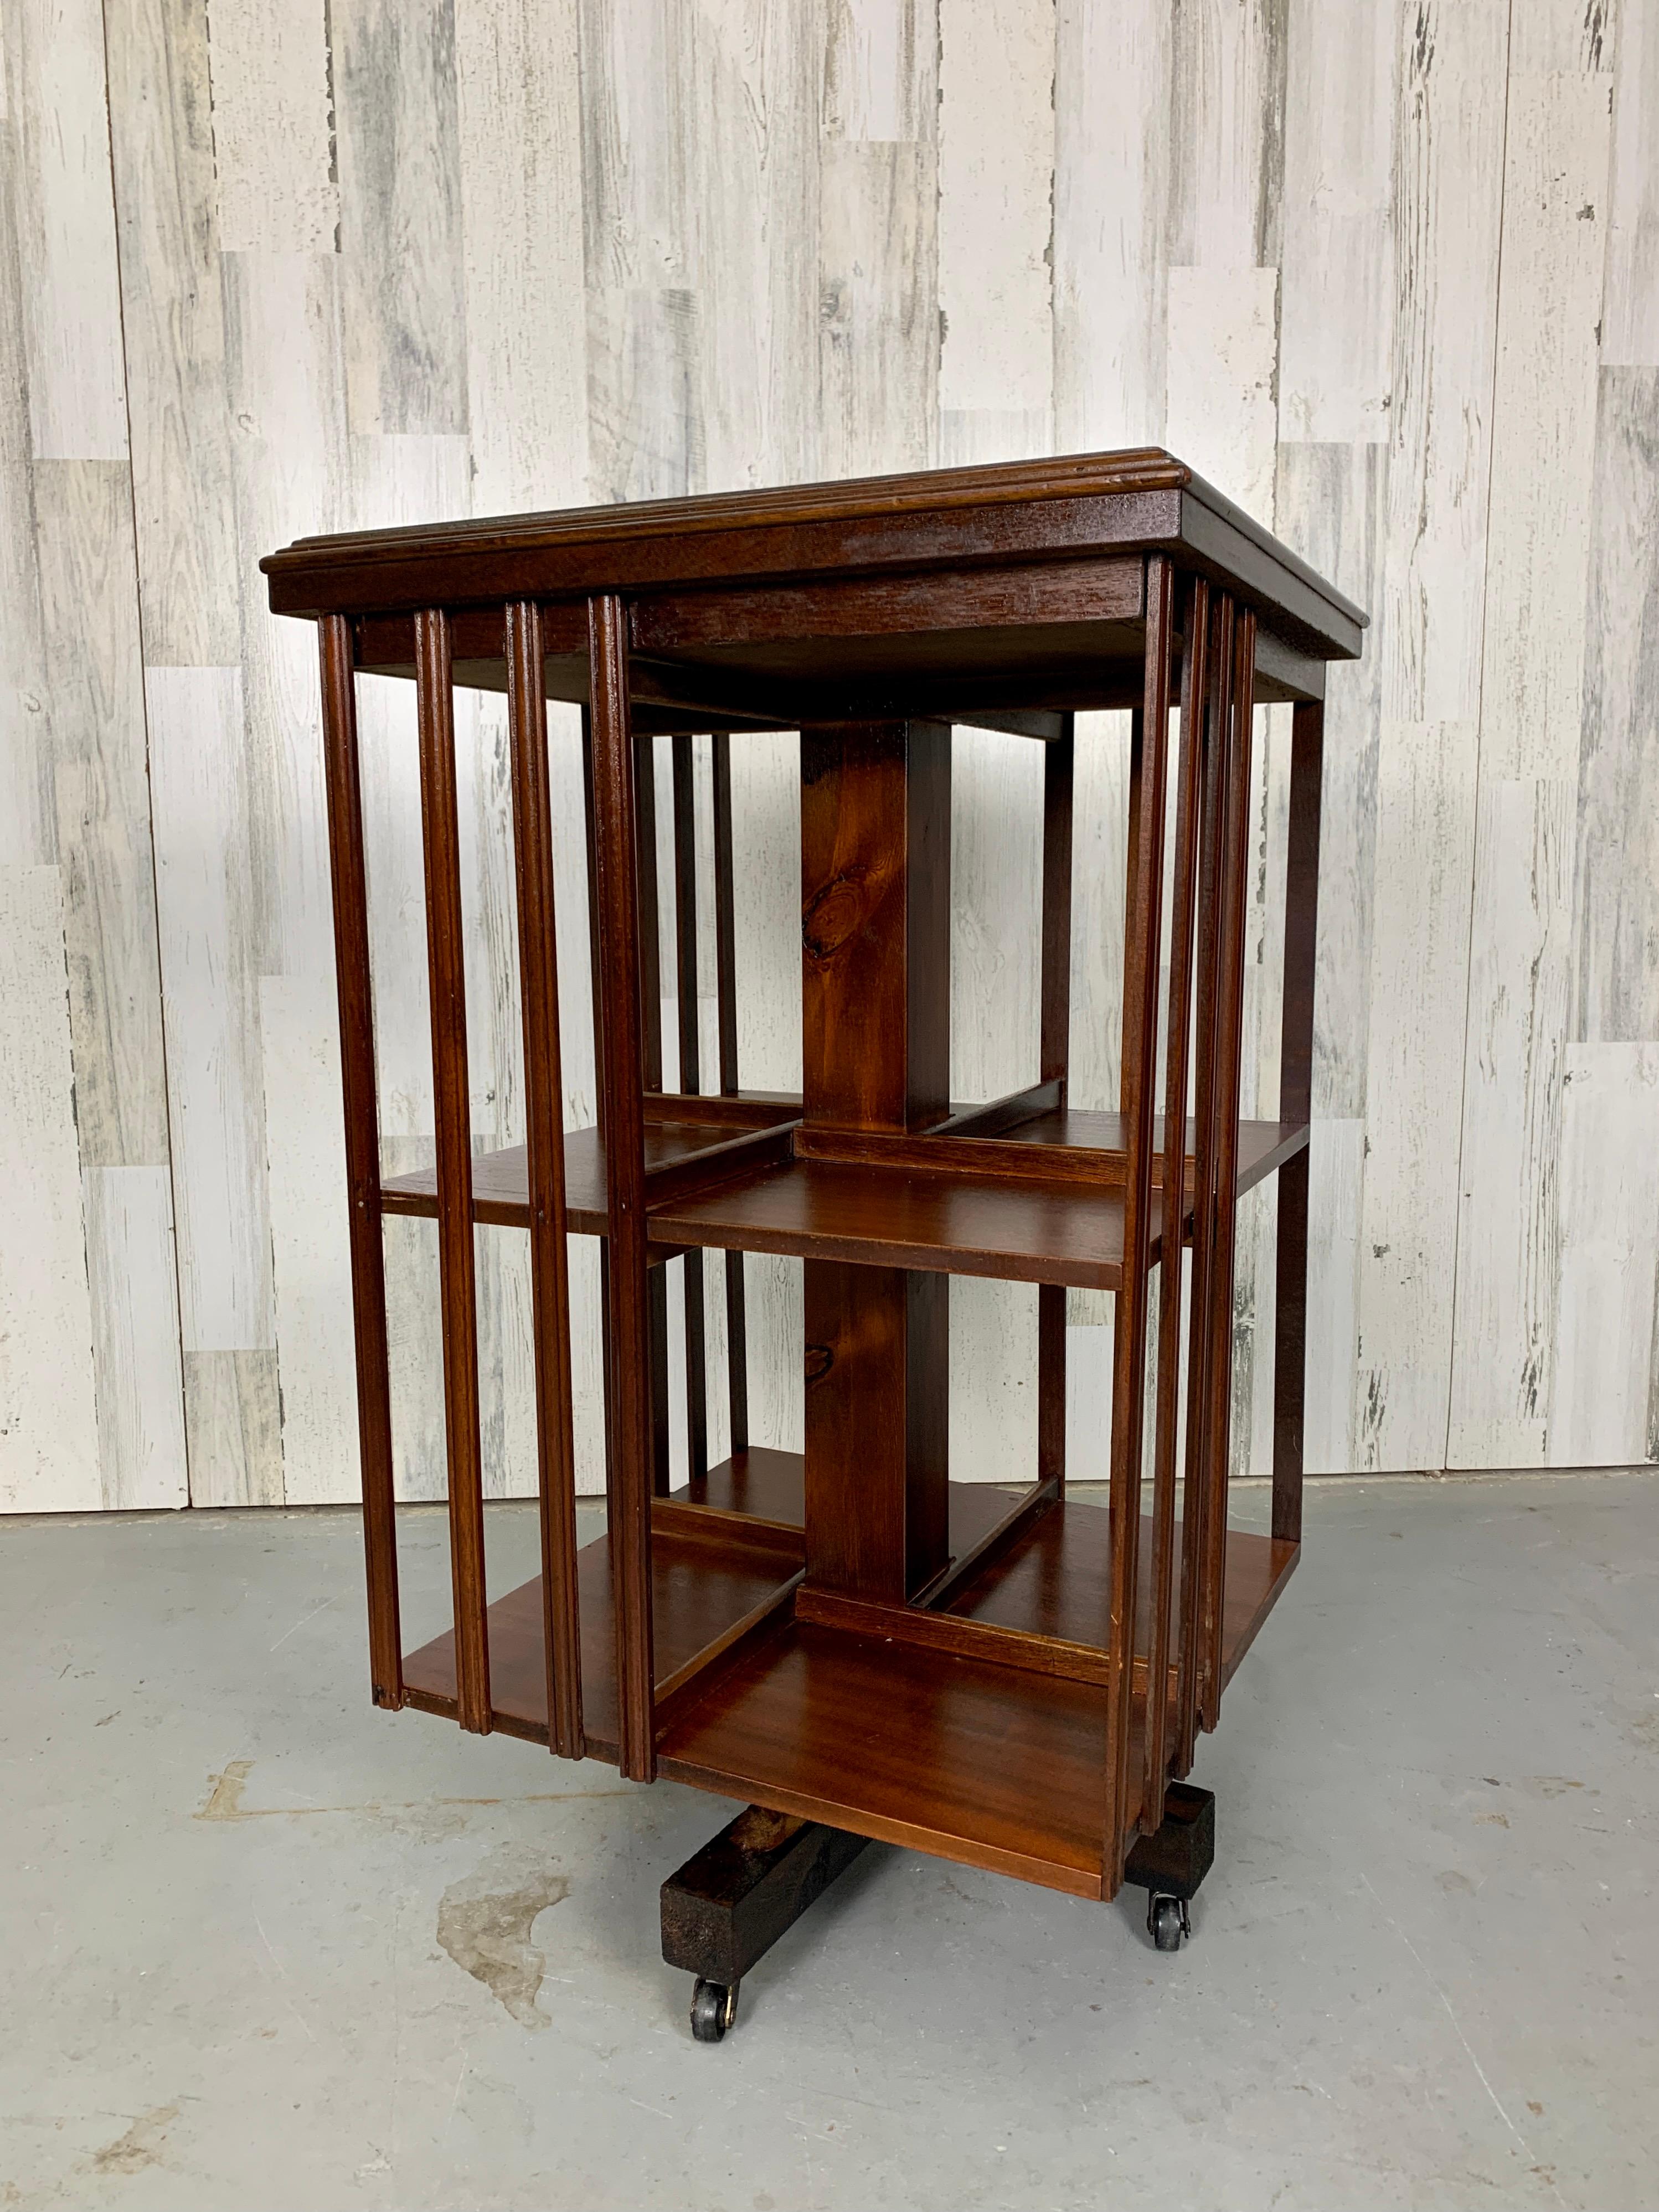 Mahogany antique style swivel bookcase with marquetry shell design on top and cross banding border, mounted on a revolving stand with casters for mobility. Cubbies are 10 3/4 high x 6.5 deep x 10 wide. 